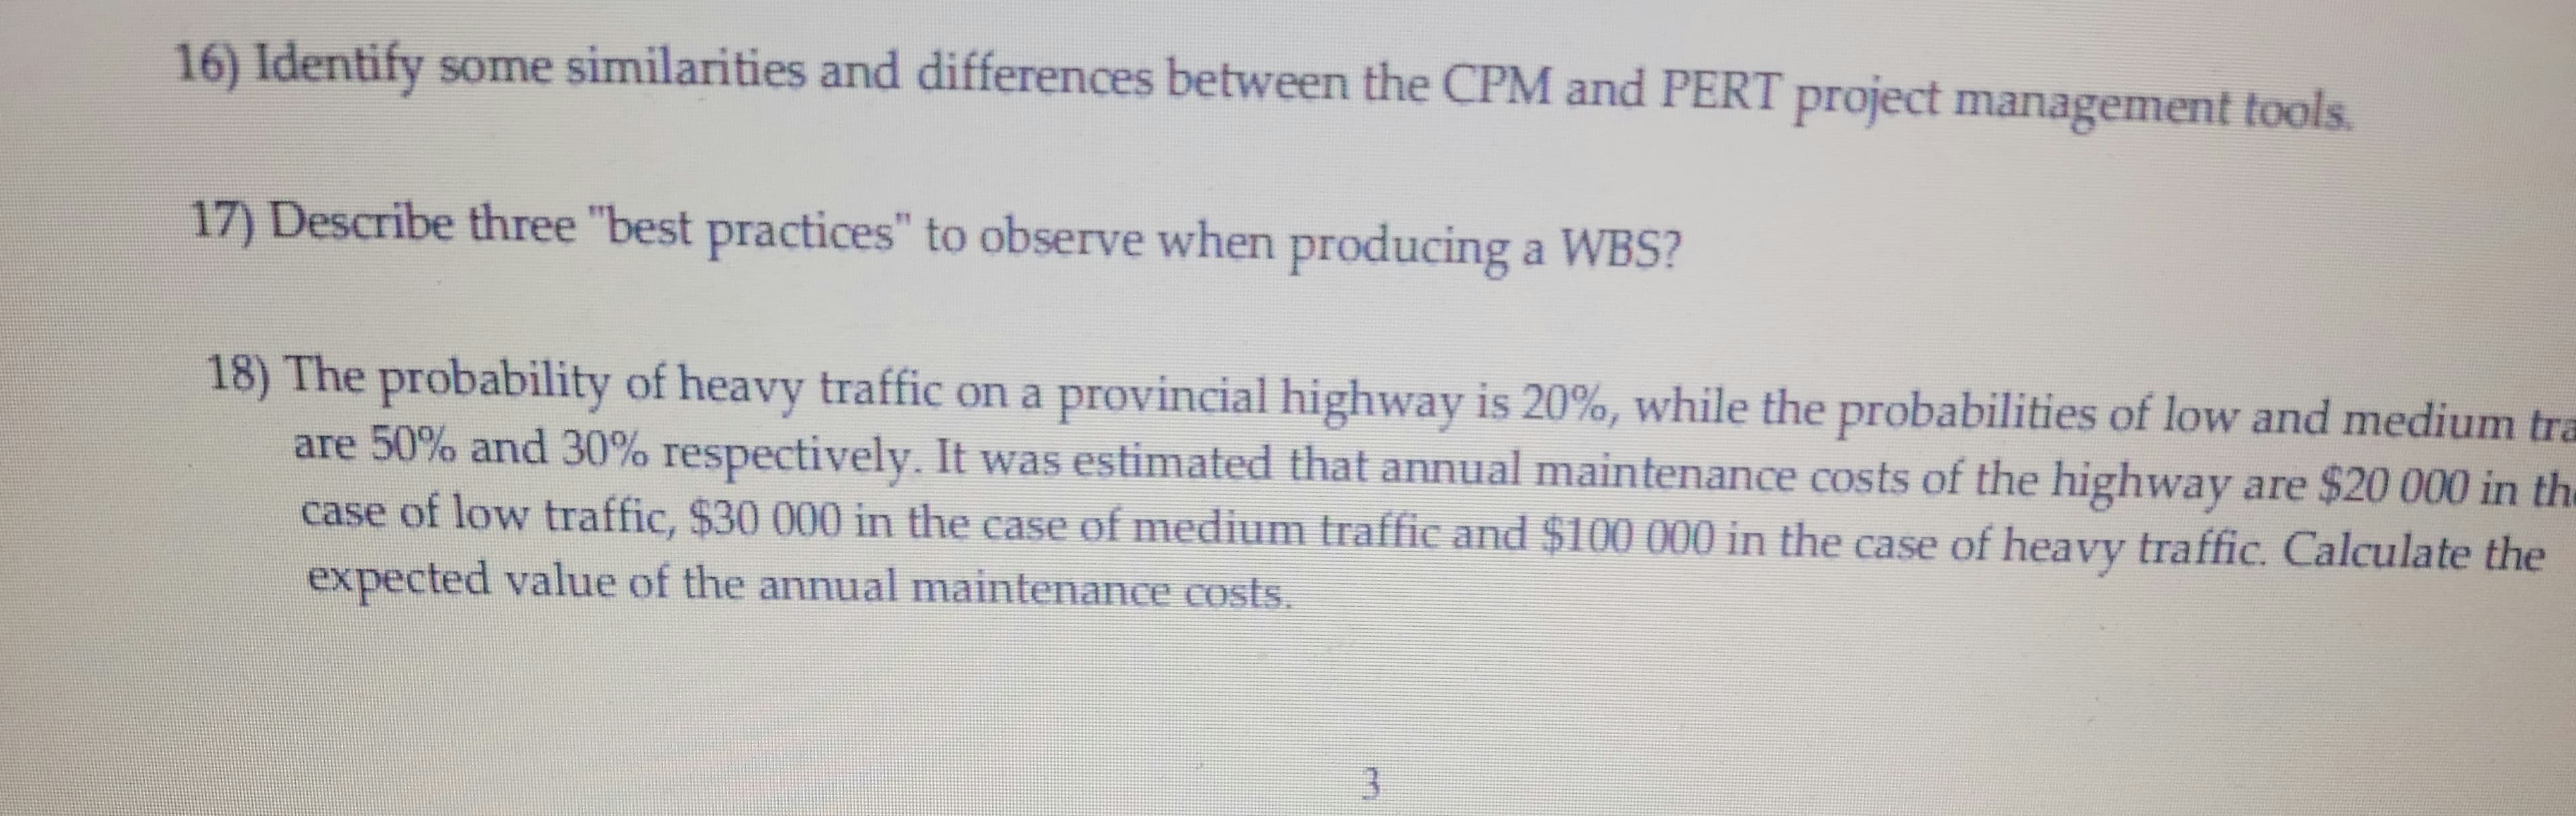 16) Identify some similarities and differences between the CPM and PERT project management tools.
17) Describe three "best practices" to observe when producing a WBS?
18) The probability of heavy traffic on a provincial highway is 20%, while the probabilities of low and medium tra
are 50% and 30% respectively. It was estimated that annual maintenance costs of the highway are $20 000 in the
case of low traffic, $30 000 in the case of medium traffic and $100 000 in the case of heavy traffic. Calculate the
expected value of the annual maintenance costs.
3
